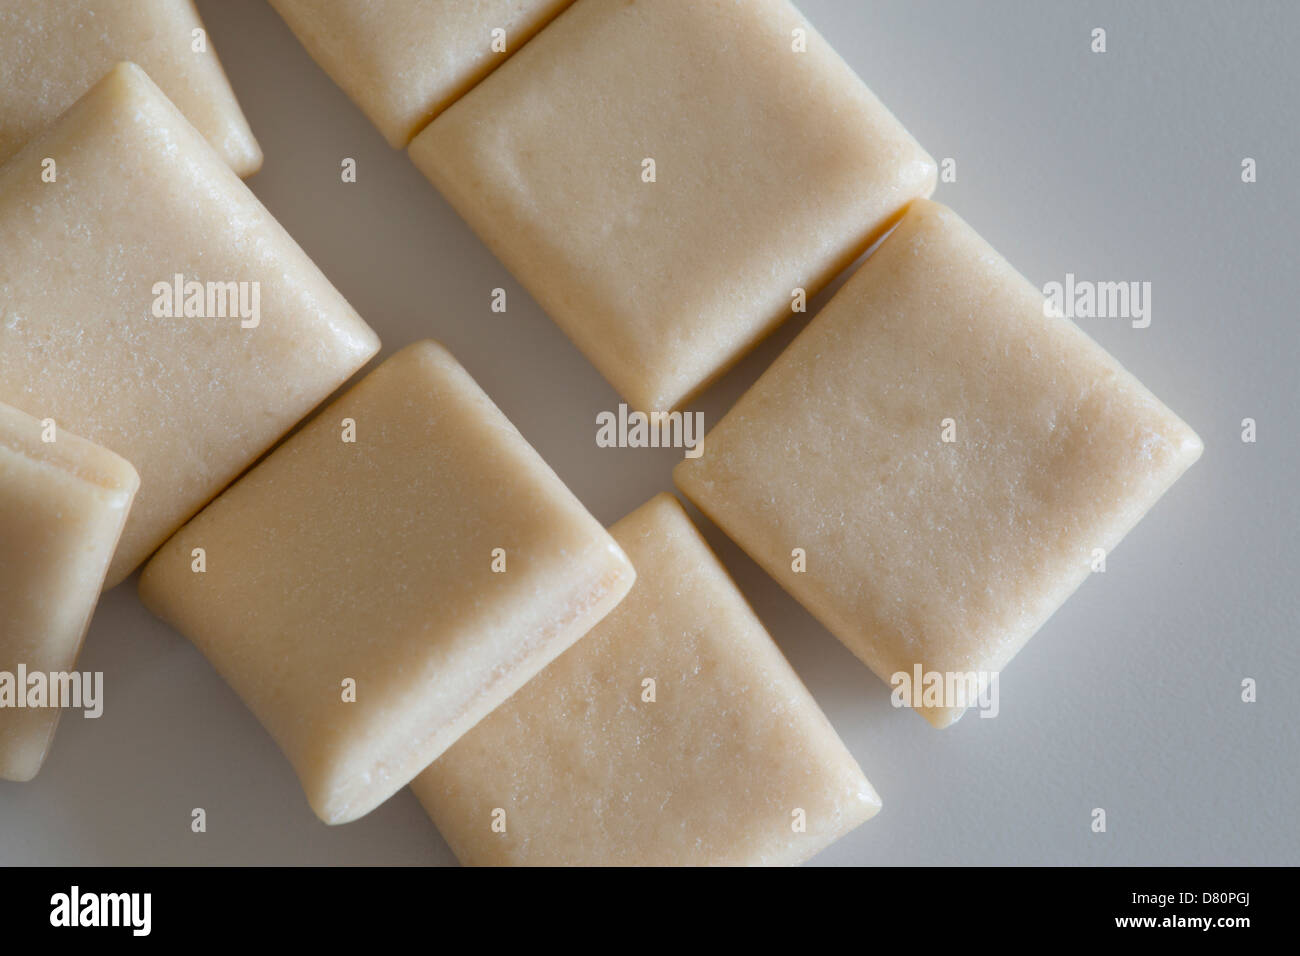 A close up of some nicotine chewing gum Stock Photo